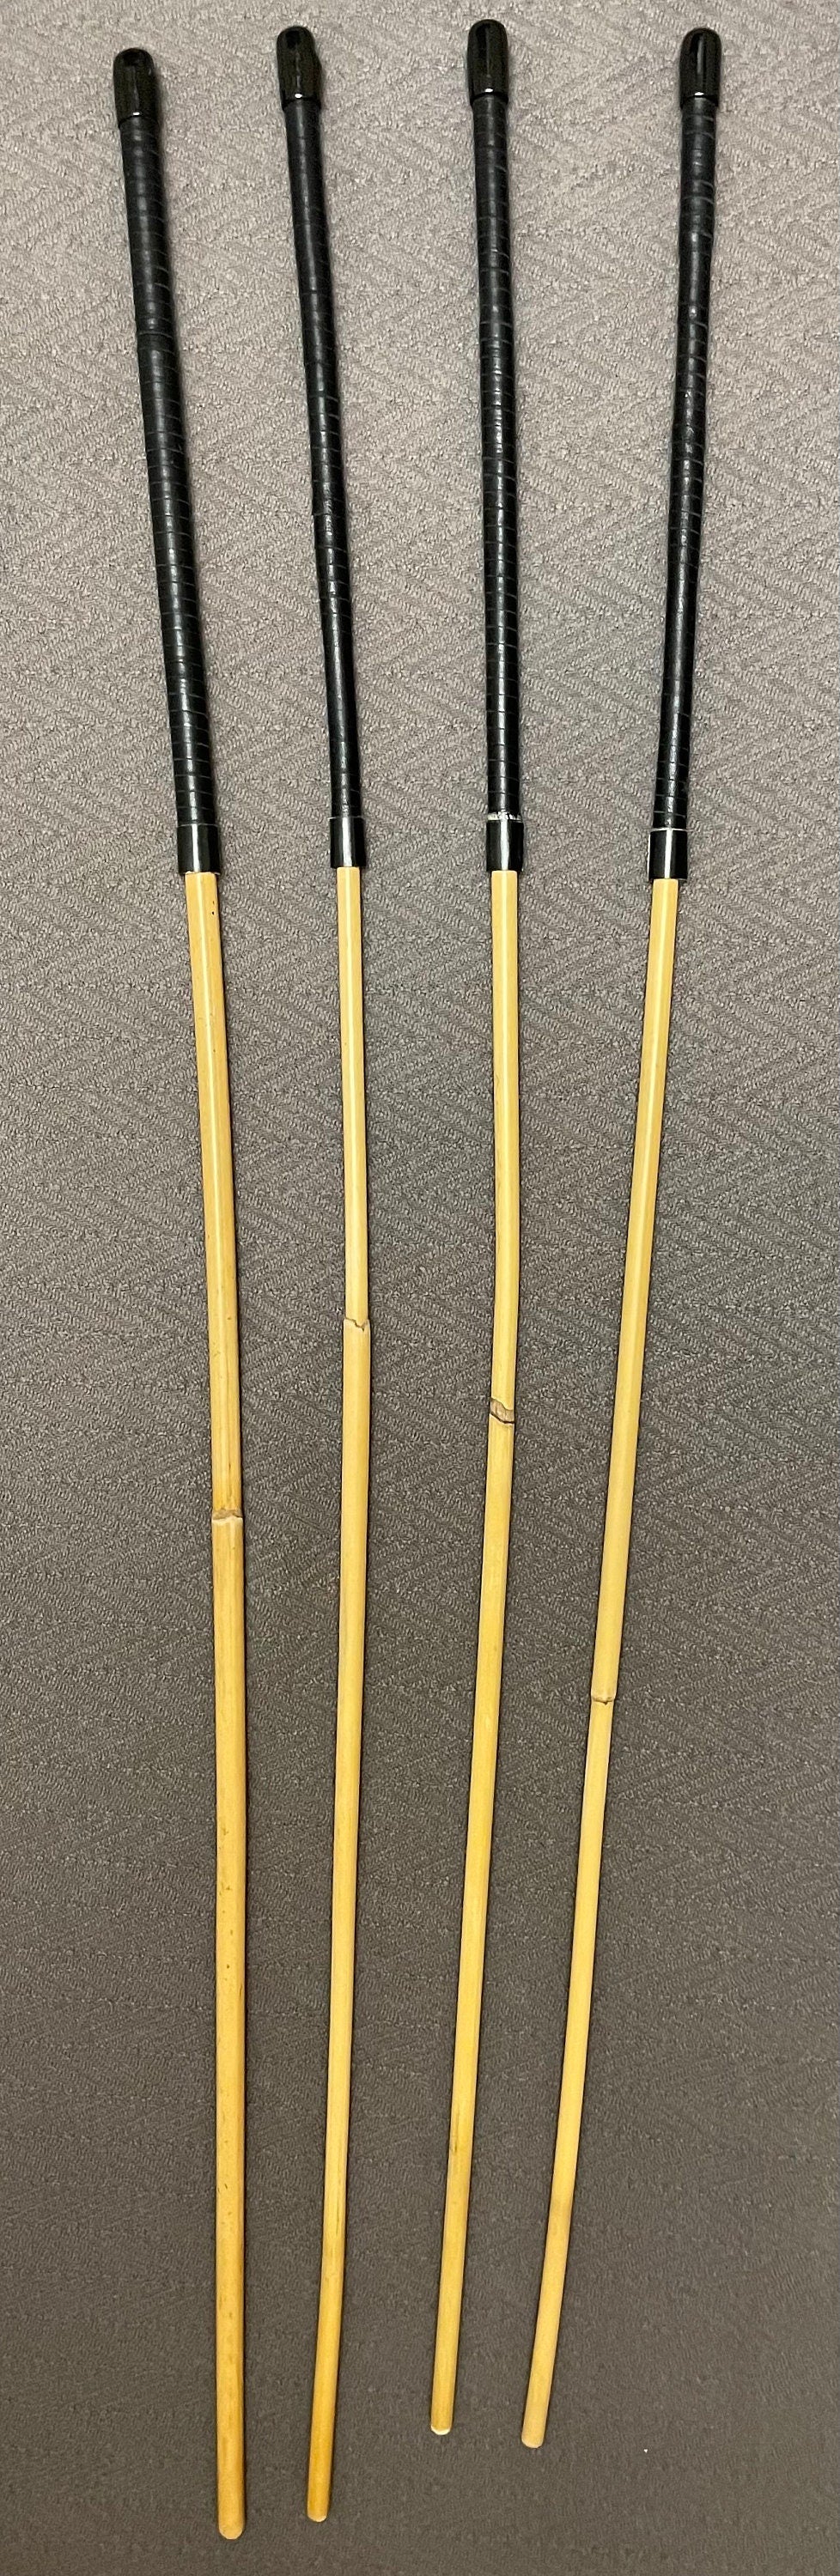 Pro Disciplinarian Set of 4 Classic Dragon Rattan Punishment Canes  / Whipping Canes  with Black Kangaroo Leather Handles